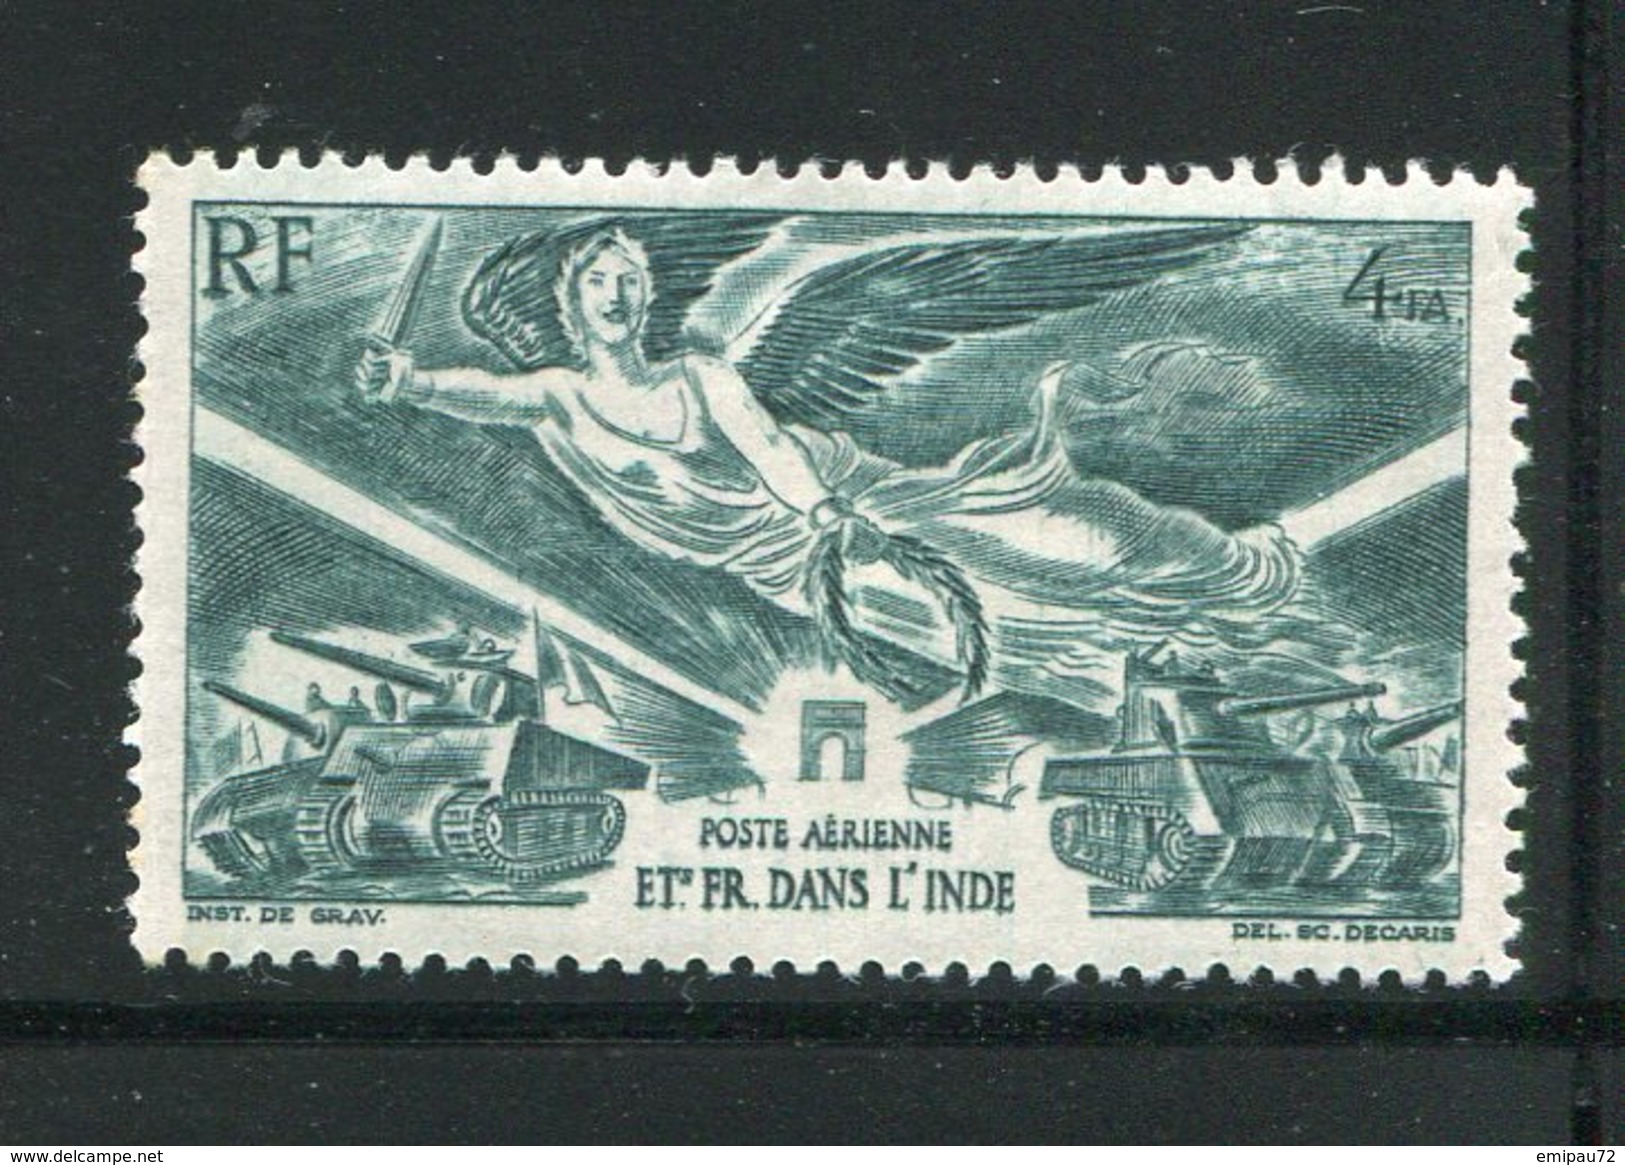 INDE- P.A Y&T N°10- Neuf Avec Charnière * - Unused Stamps